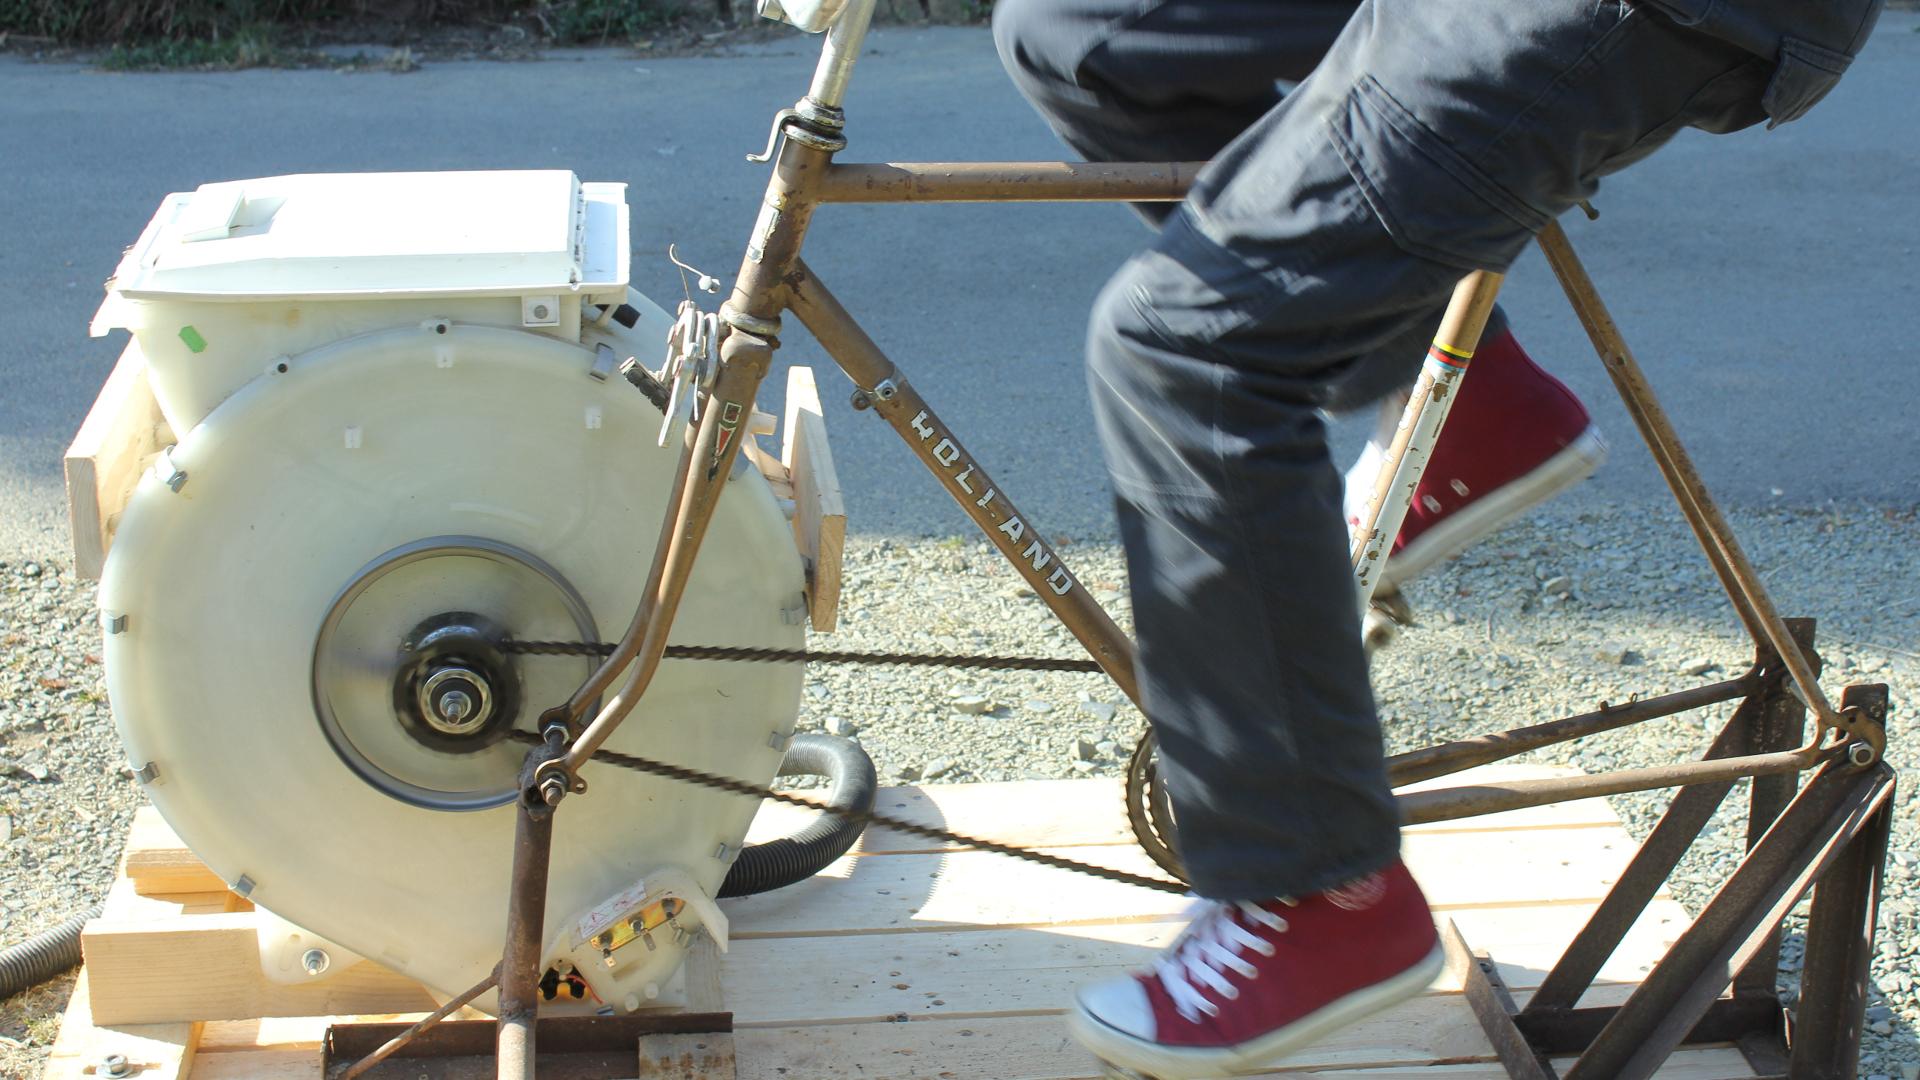 Make a Spin Dryer From a Discarded Washing Machine Drum,  an Abandoned Bicycle and a Pallet.